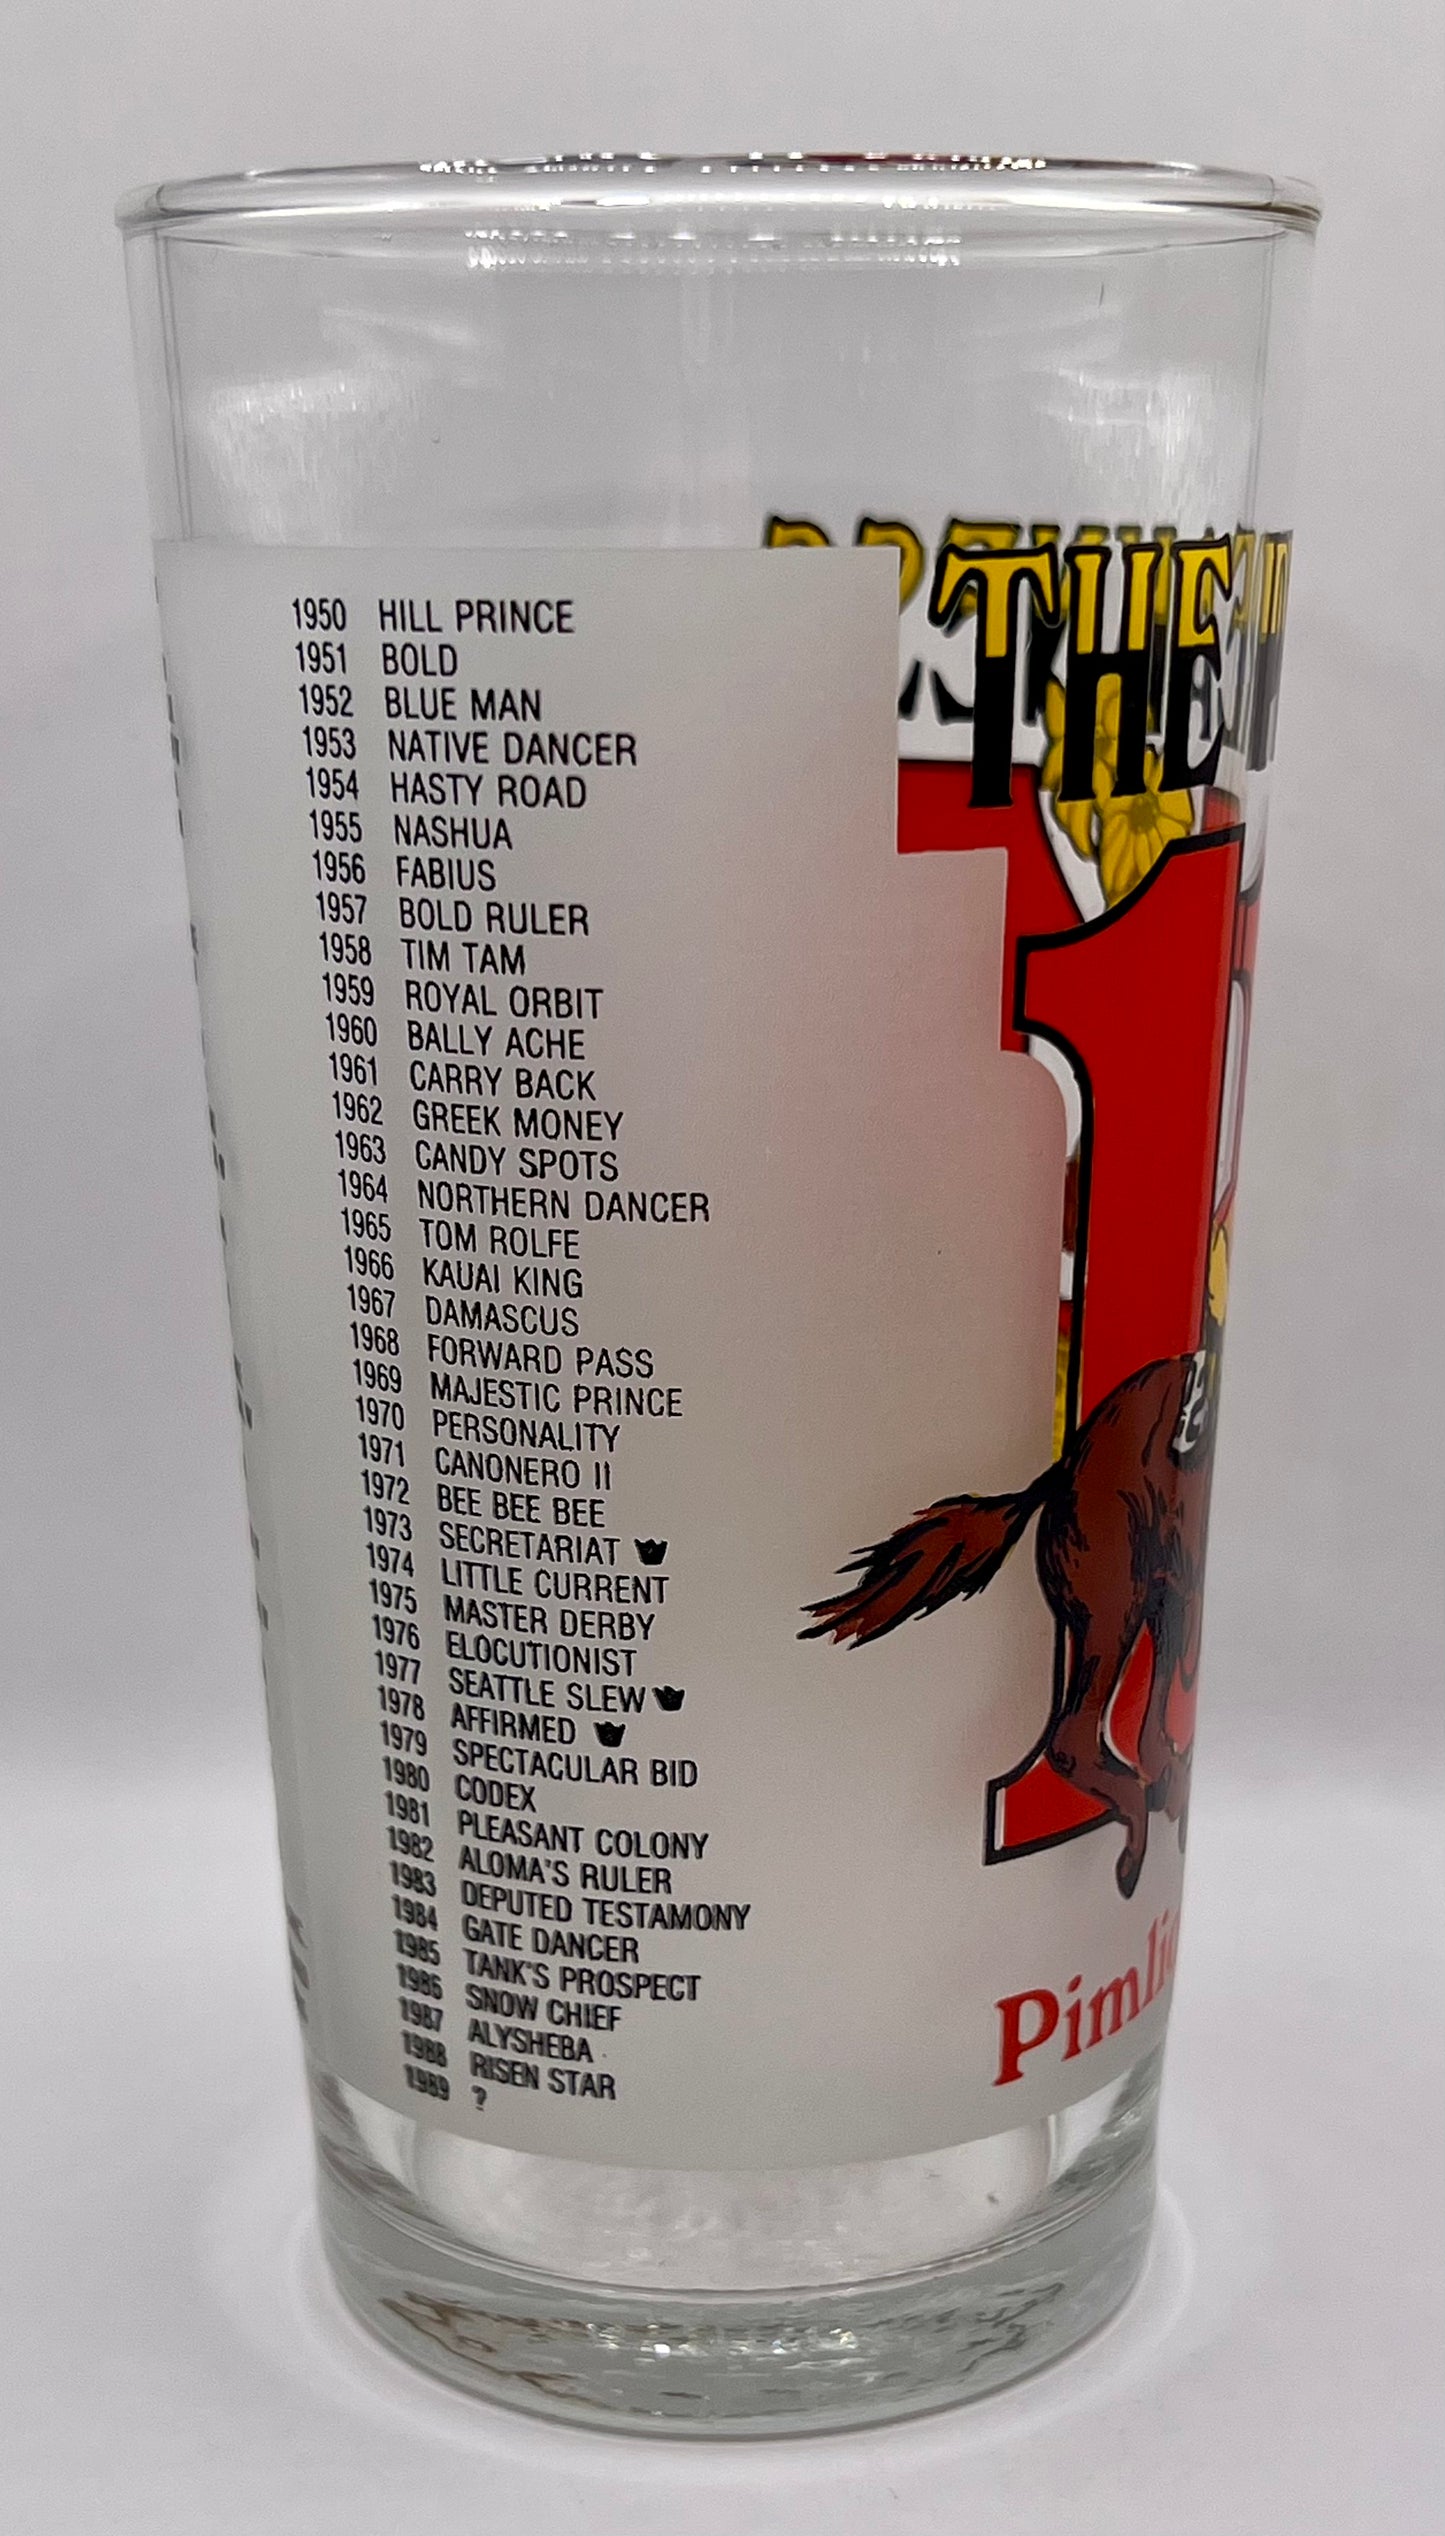 1989 Preakness Stakes Glass